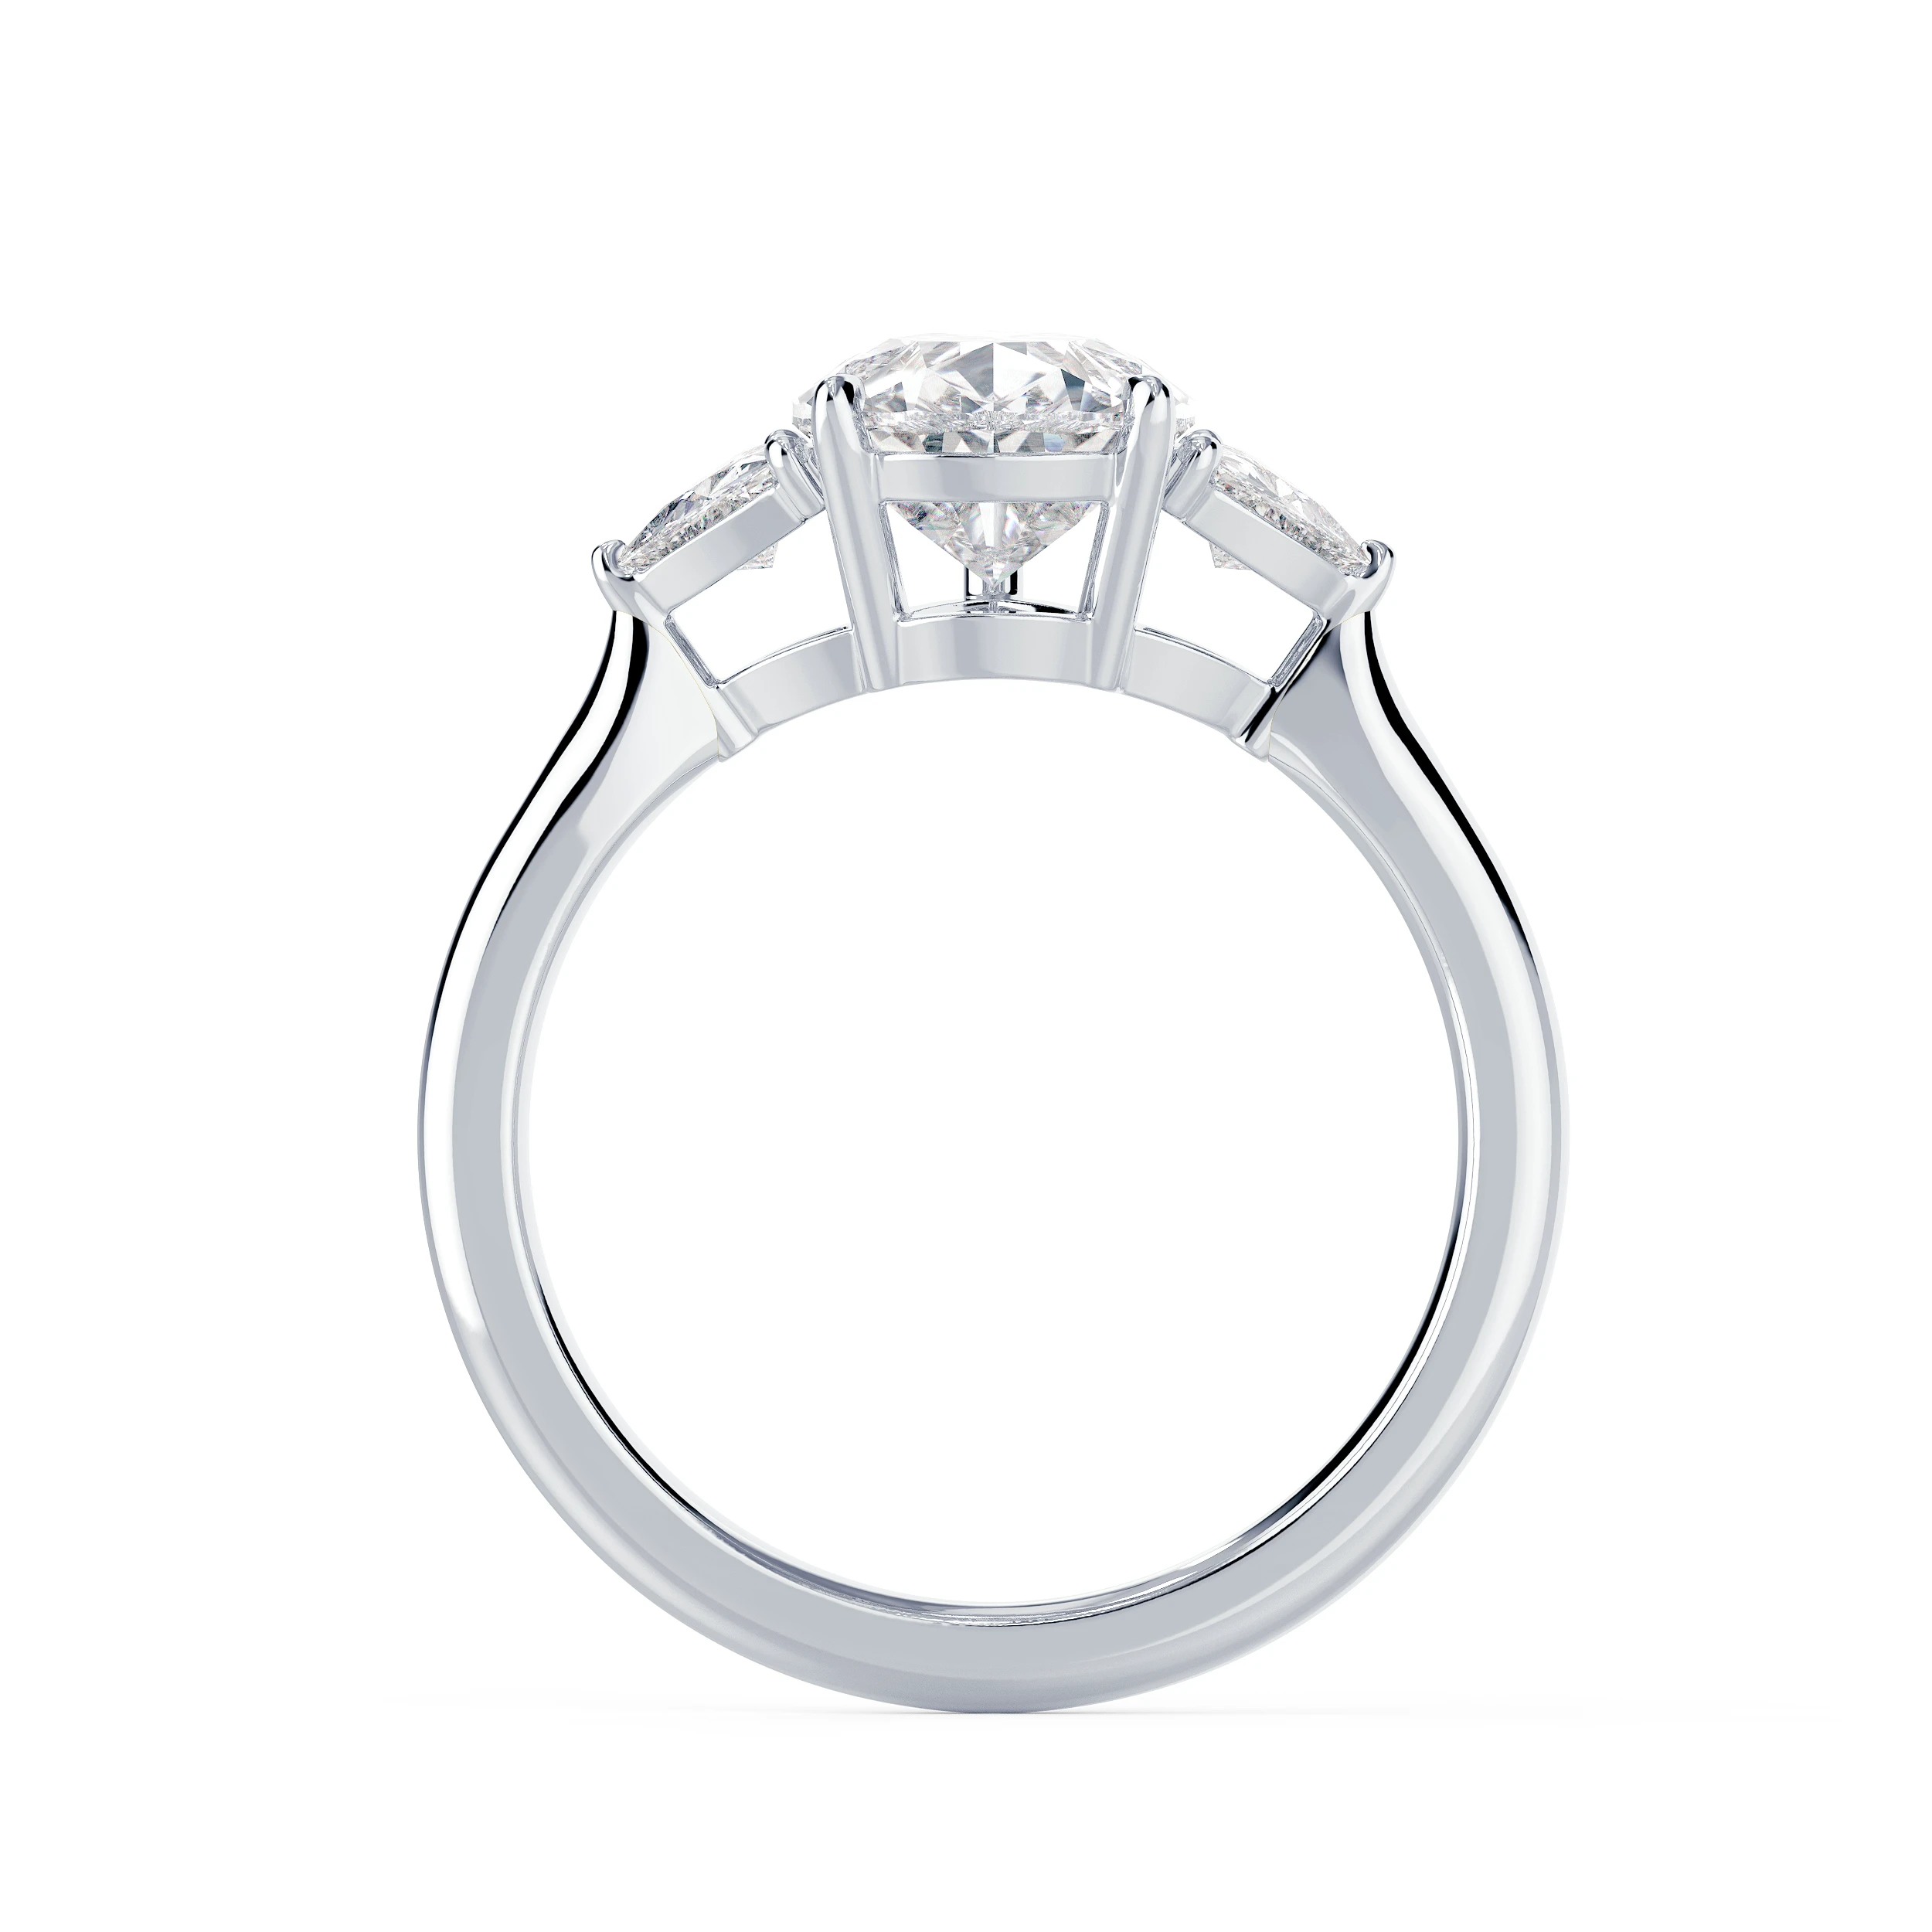 Lab Grown Diamonds set in White Gold Pear and Trillion Diamond Engagement Ring (Profile View)